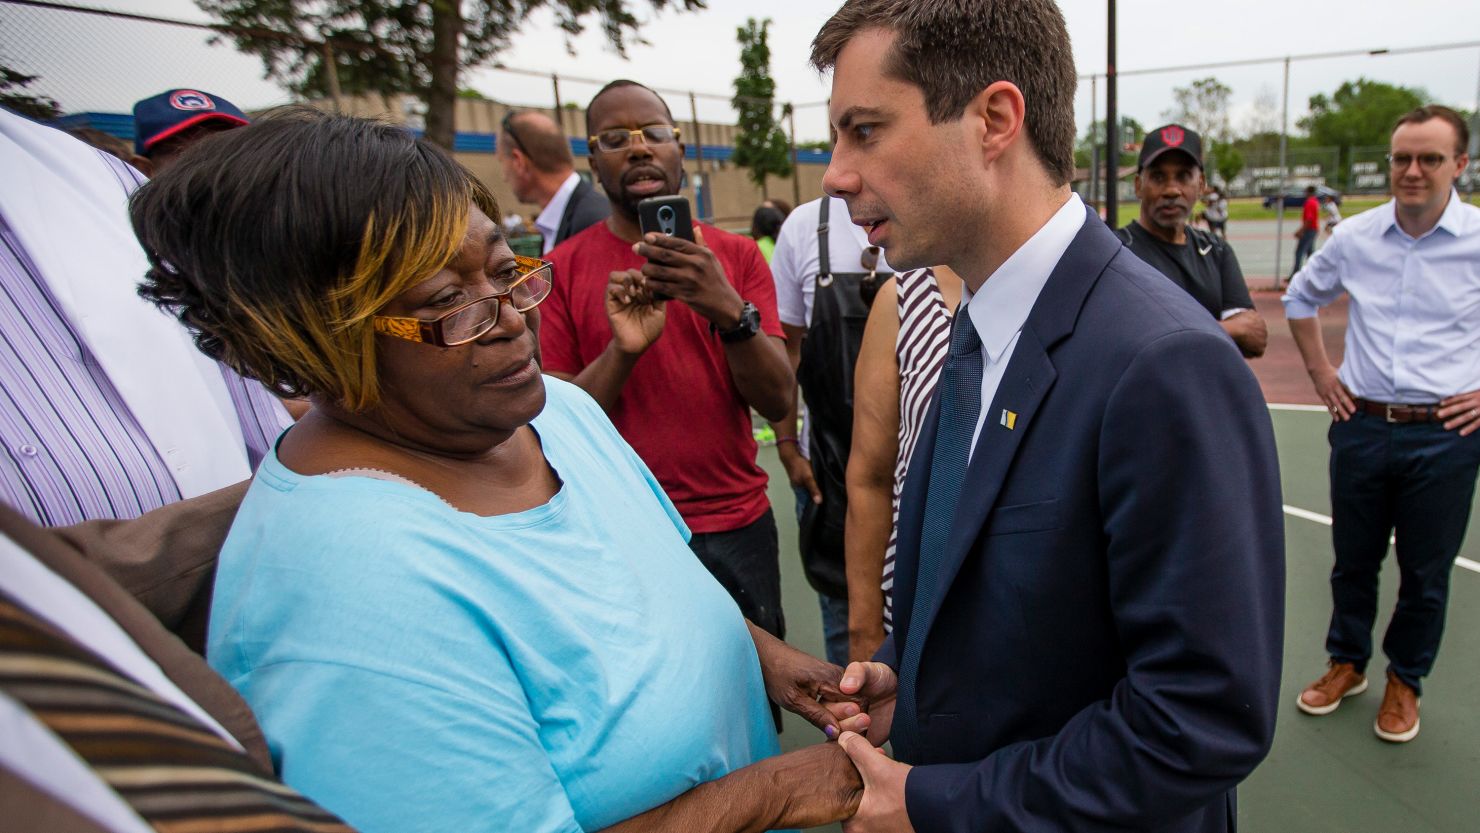 South Bend Mayor Pete Buttigieg shares a moment with Shirley Newbill, the mother of shooting victim Eric Logan.